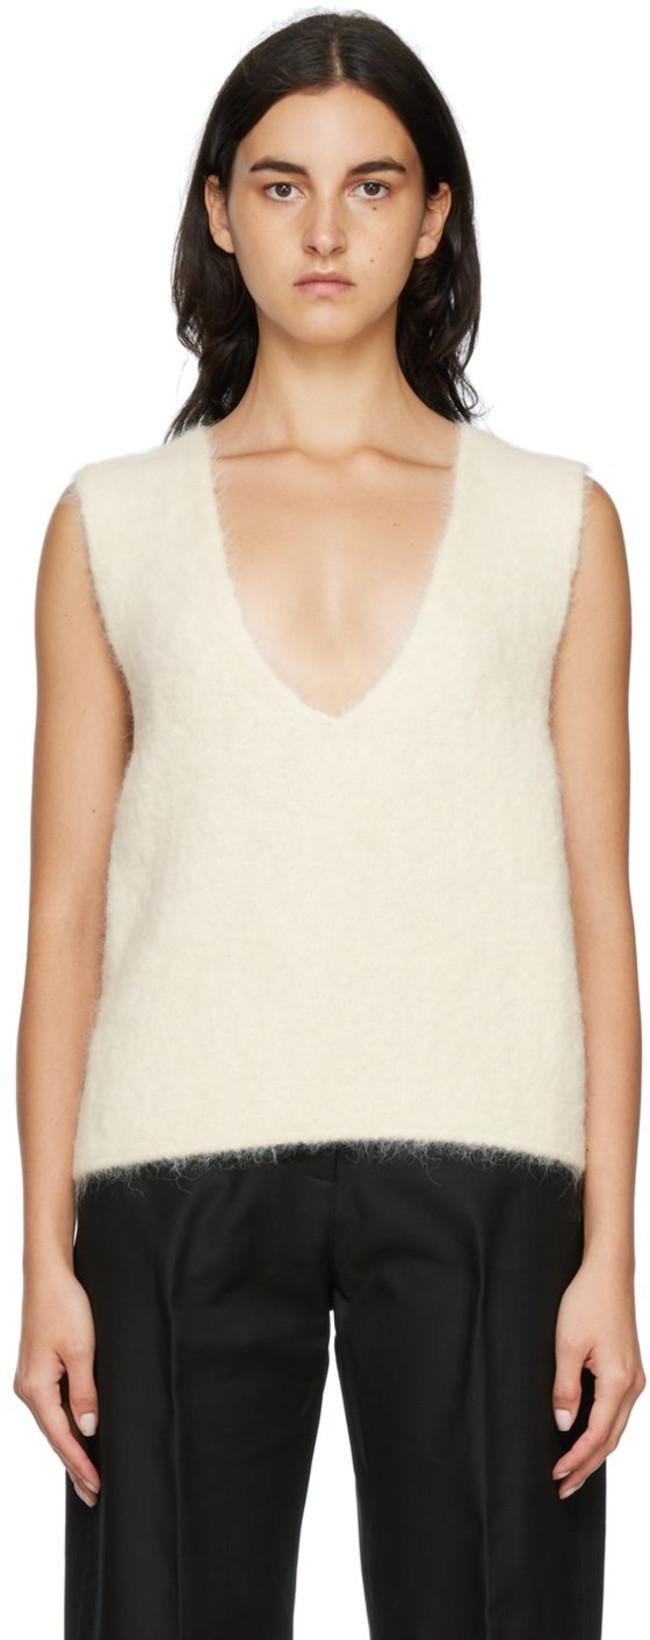 SSENSE Exclusive Off-White Cropped Vest by ARCH THE